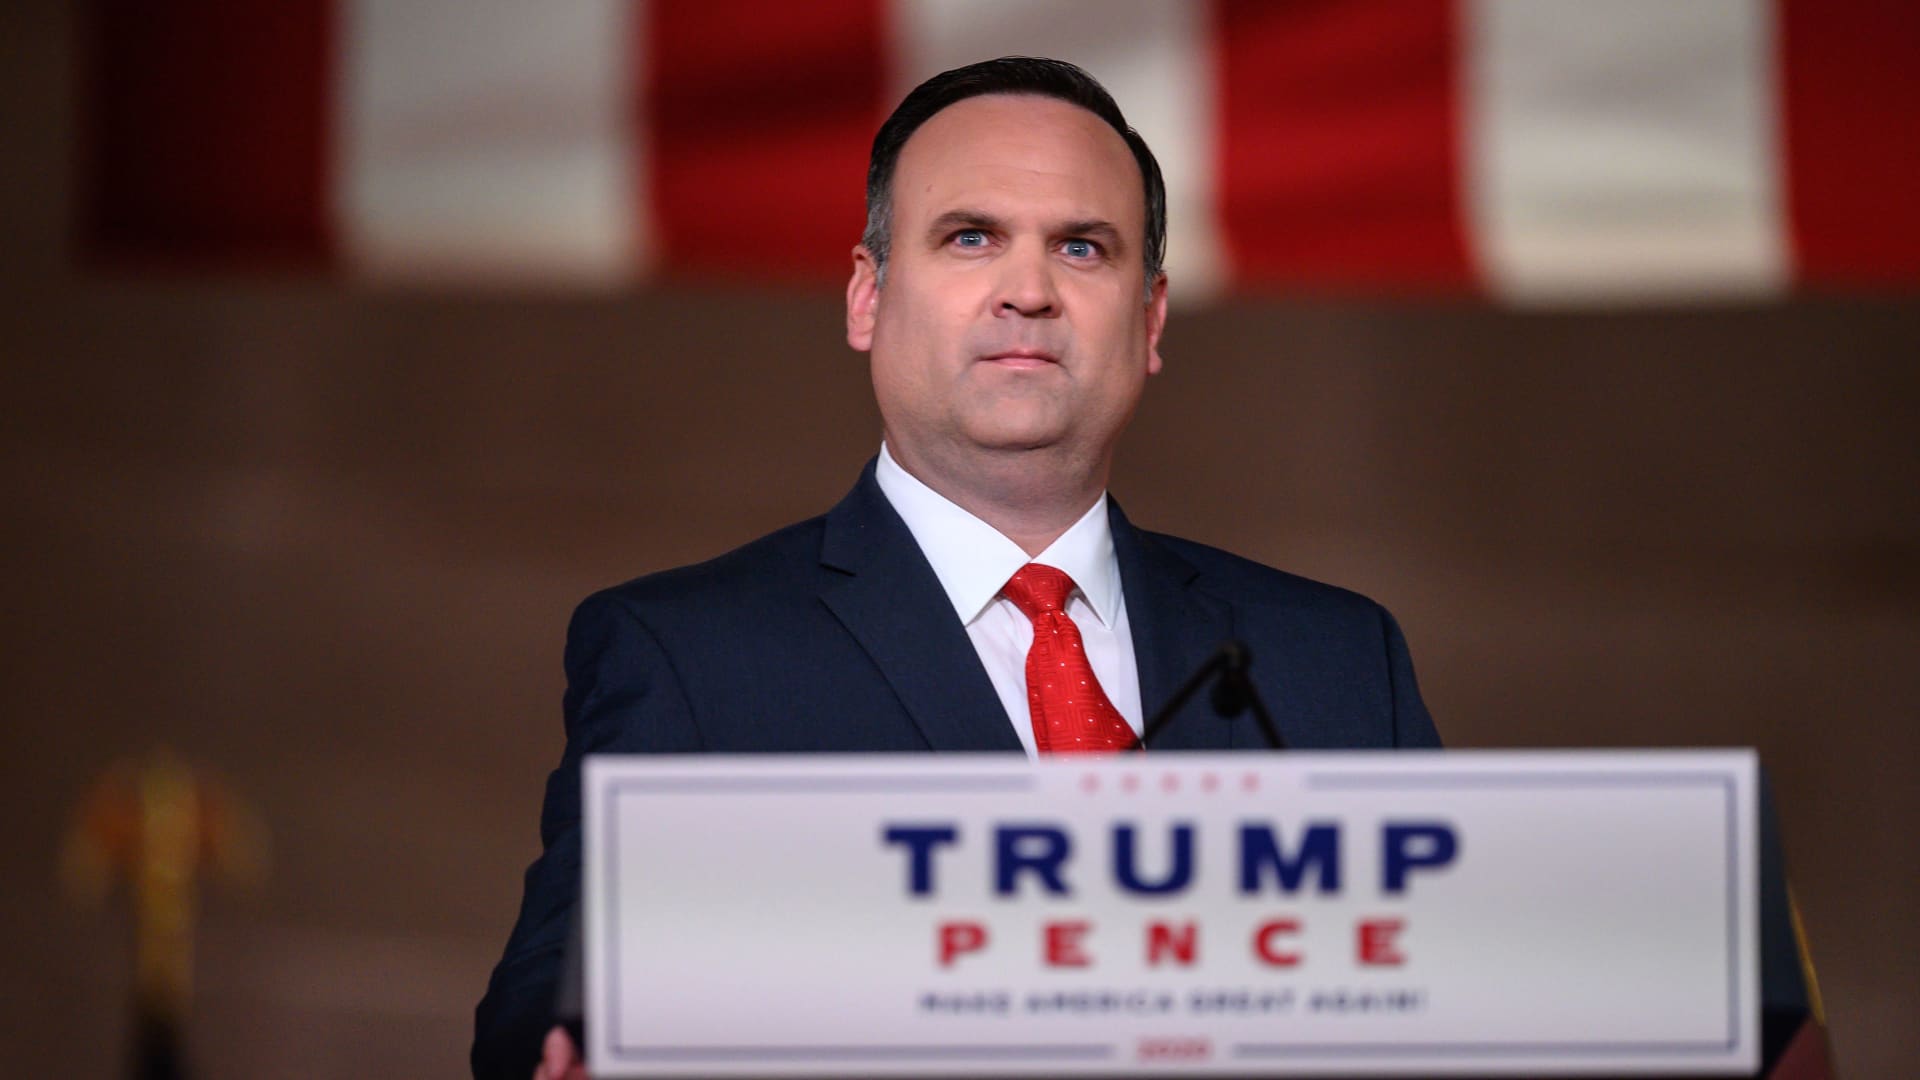 White House Deputy Chief of Staff for Communications Dan Scavino addresses the Republican National Convention in a pre-recorded speech at the Andrew W. Mellon Auditorium in Washington, DC, on August 26, 2020.